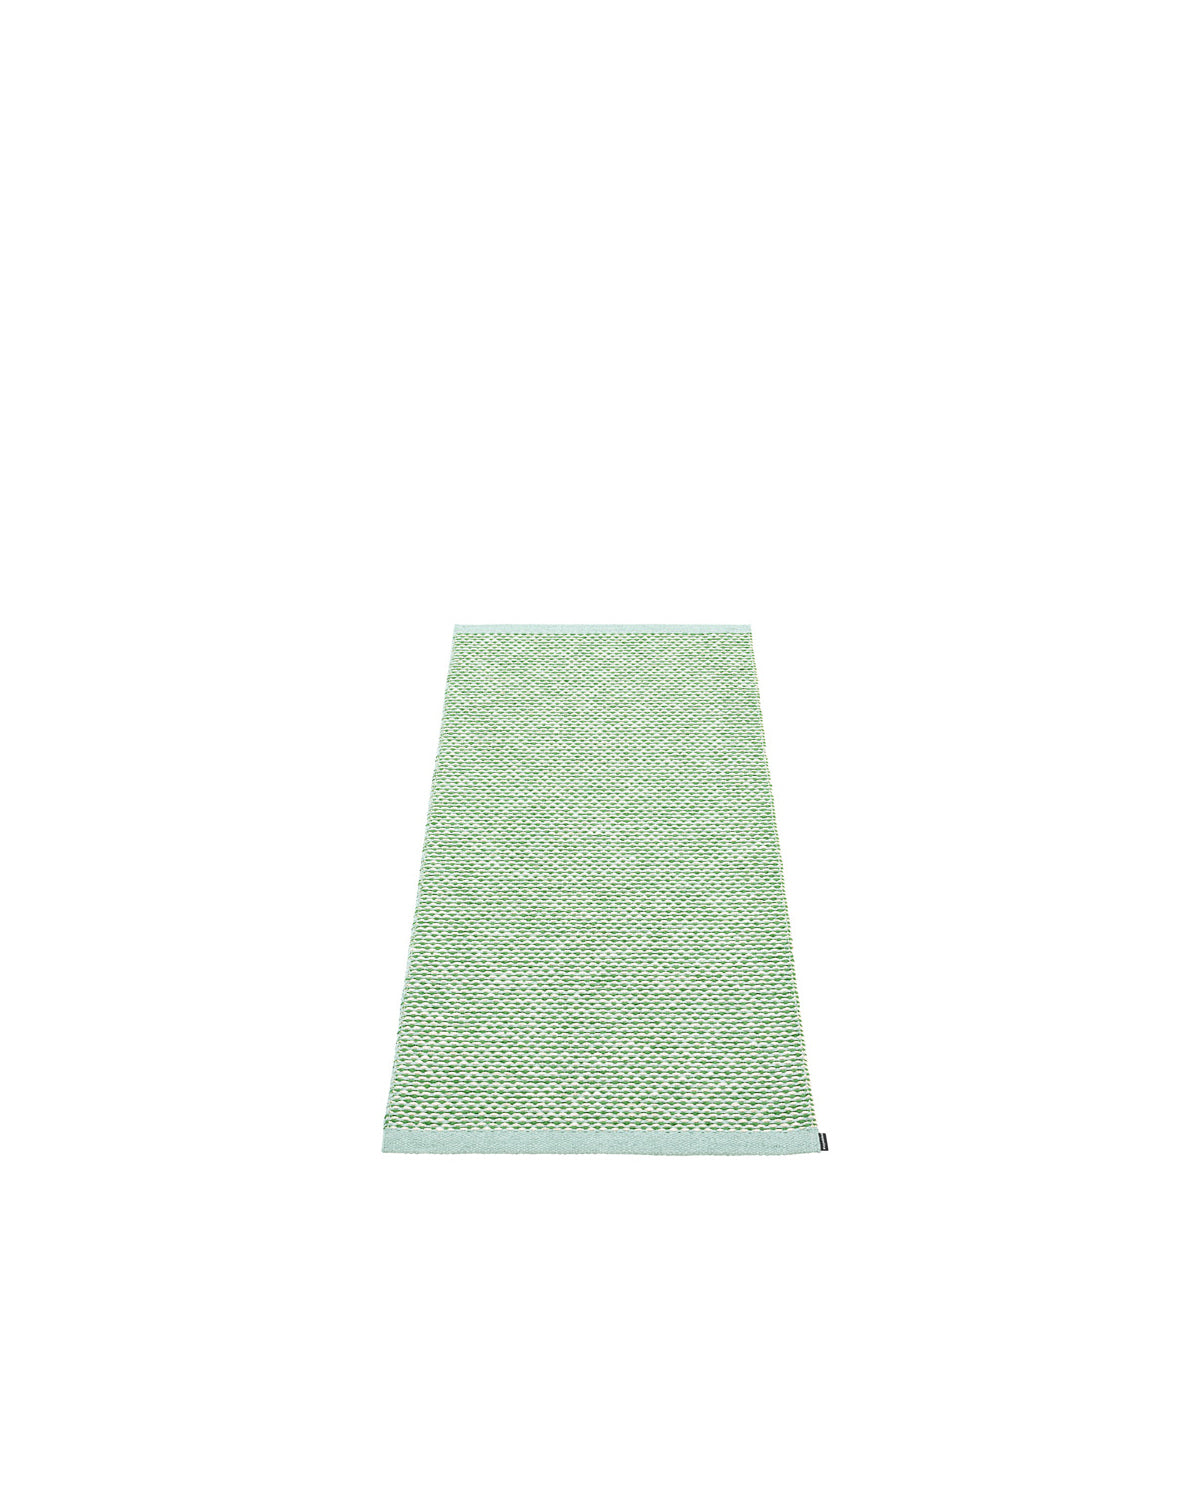 Pappelina Rug EFFI Pale Turquoise  image 3